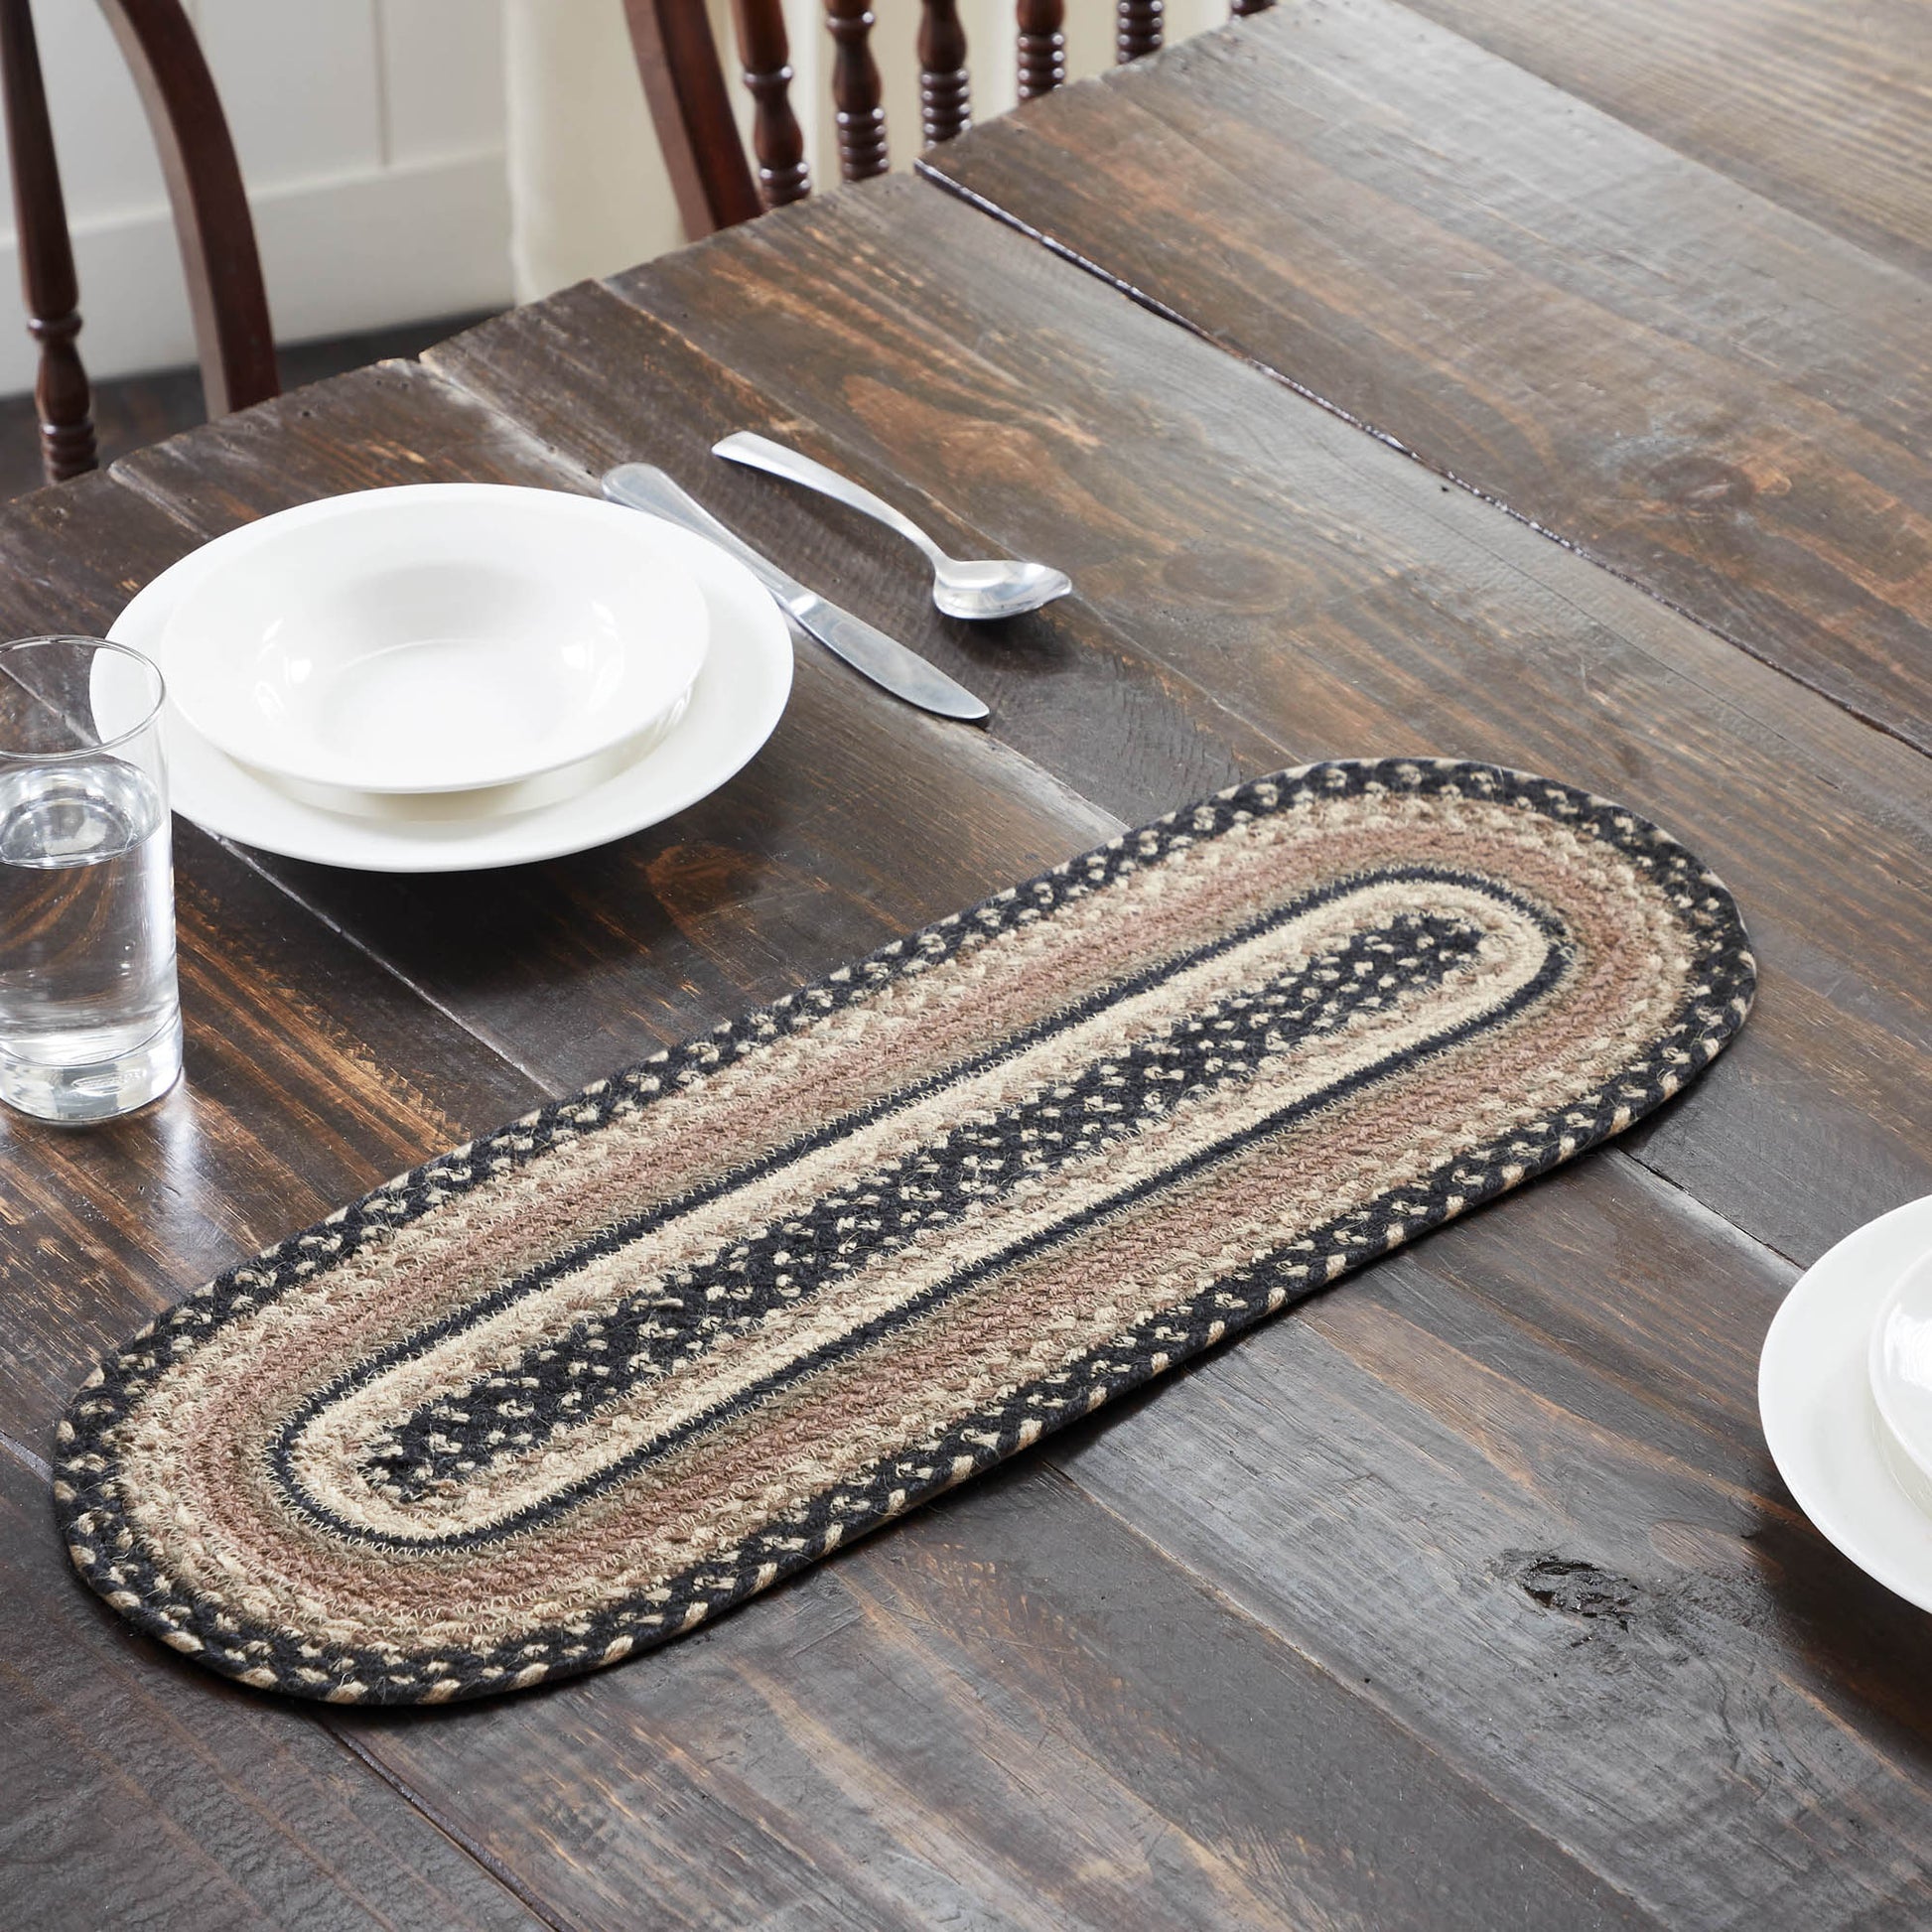 81450-Sawyer-Mill-Charcoal-Creme-Jute-Oval-Runner-8x24-image-3